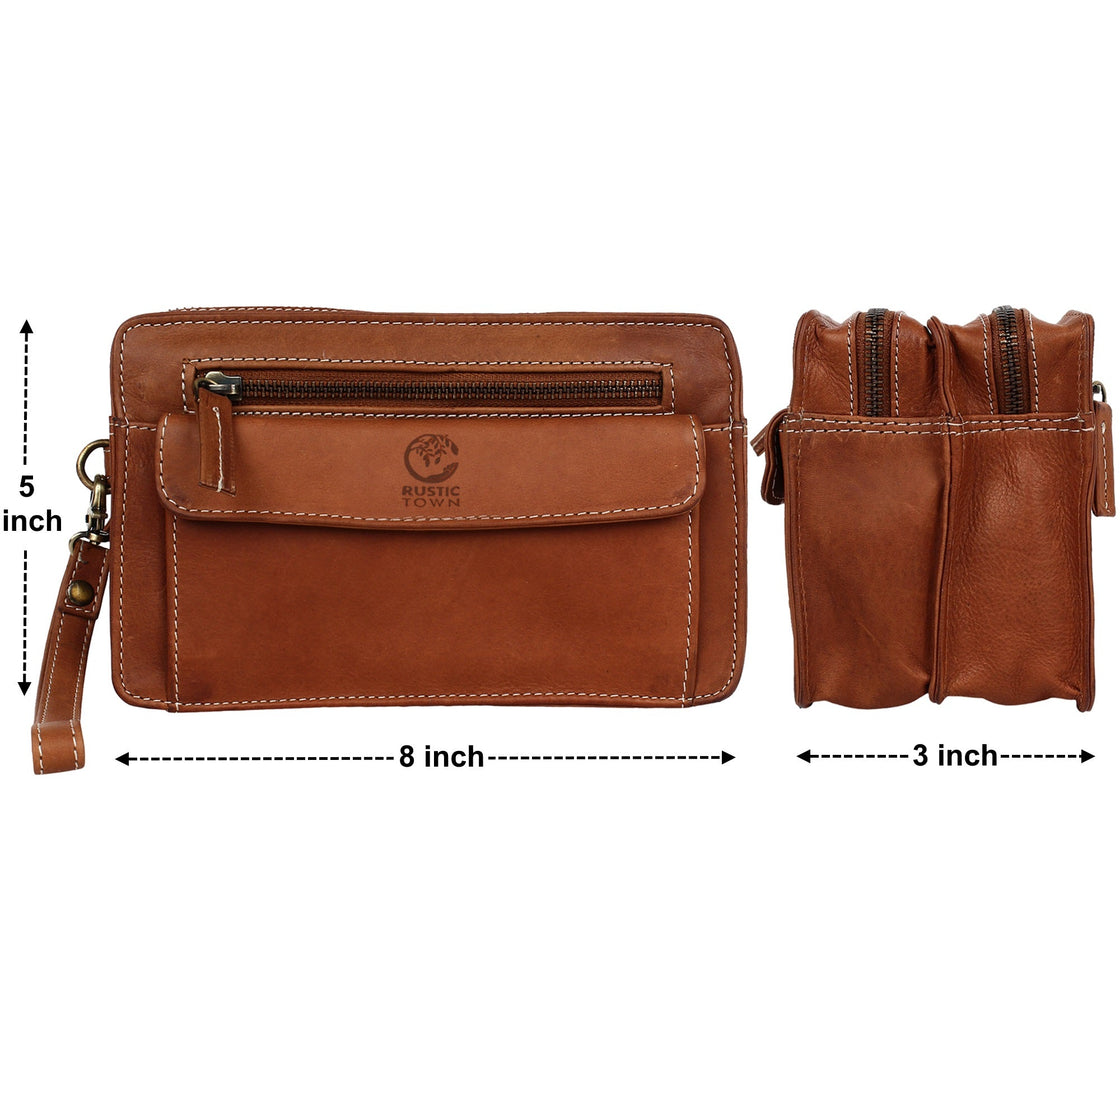 Men's Leather Bags | Briefcases & Travel Bags | Leather Company